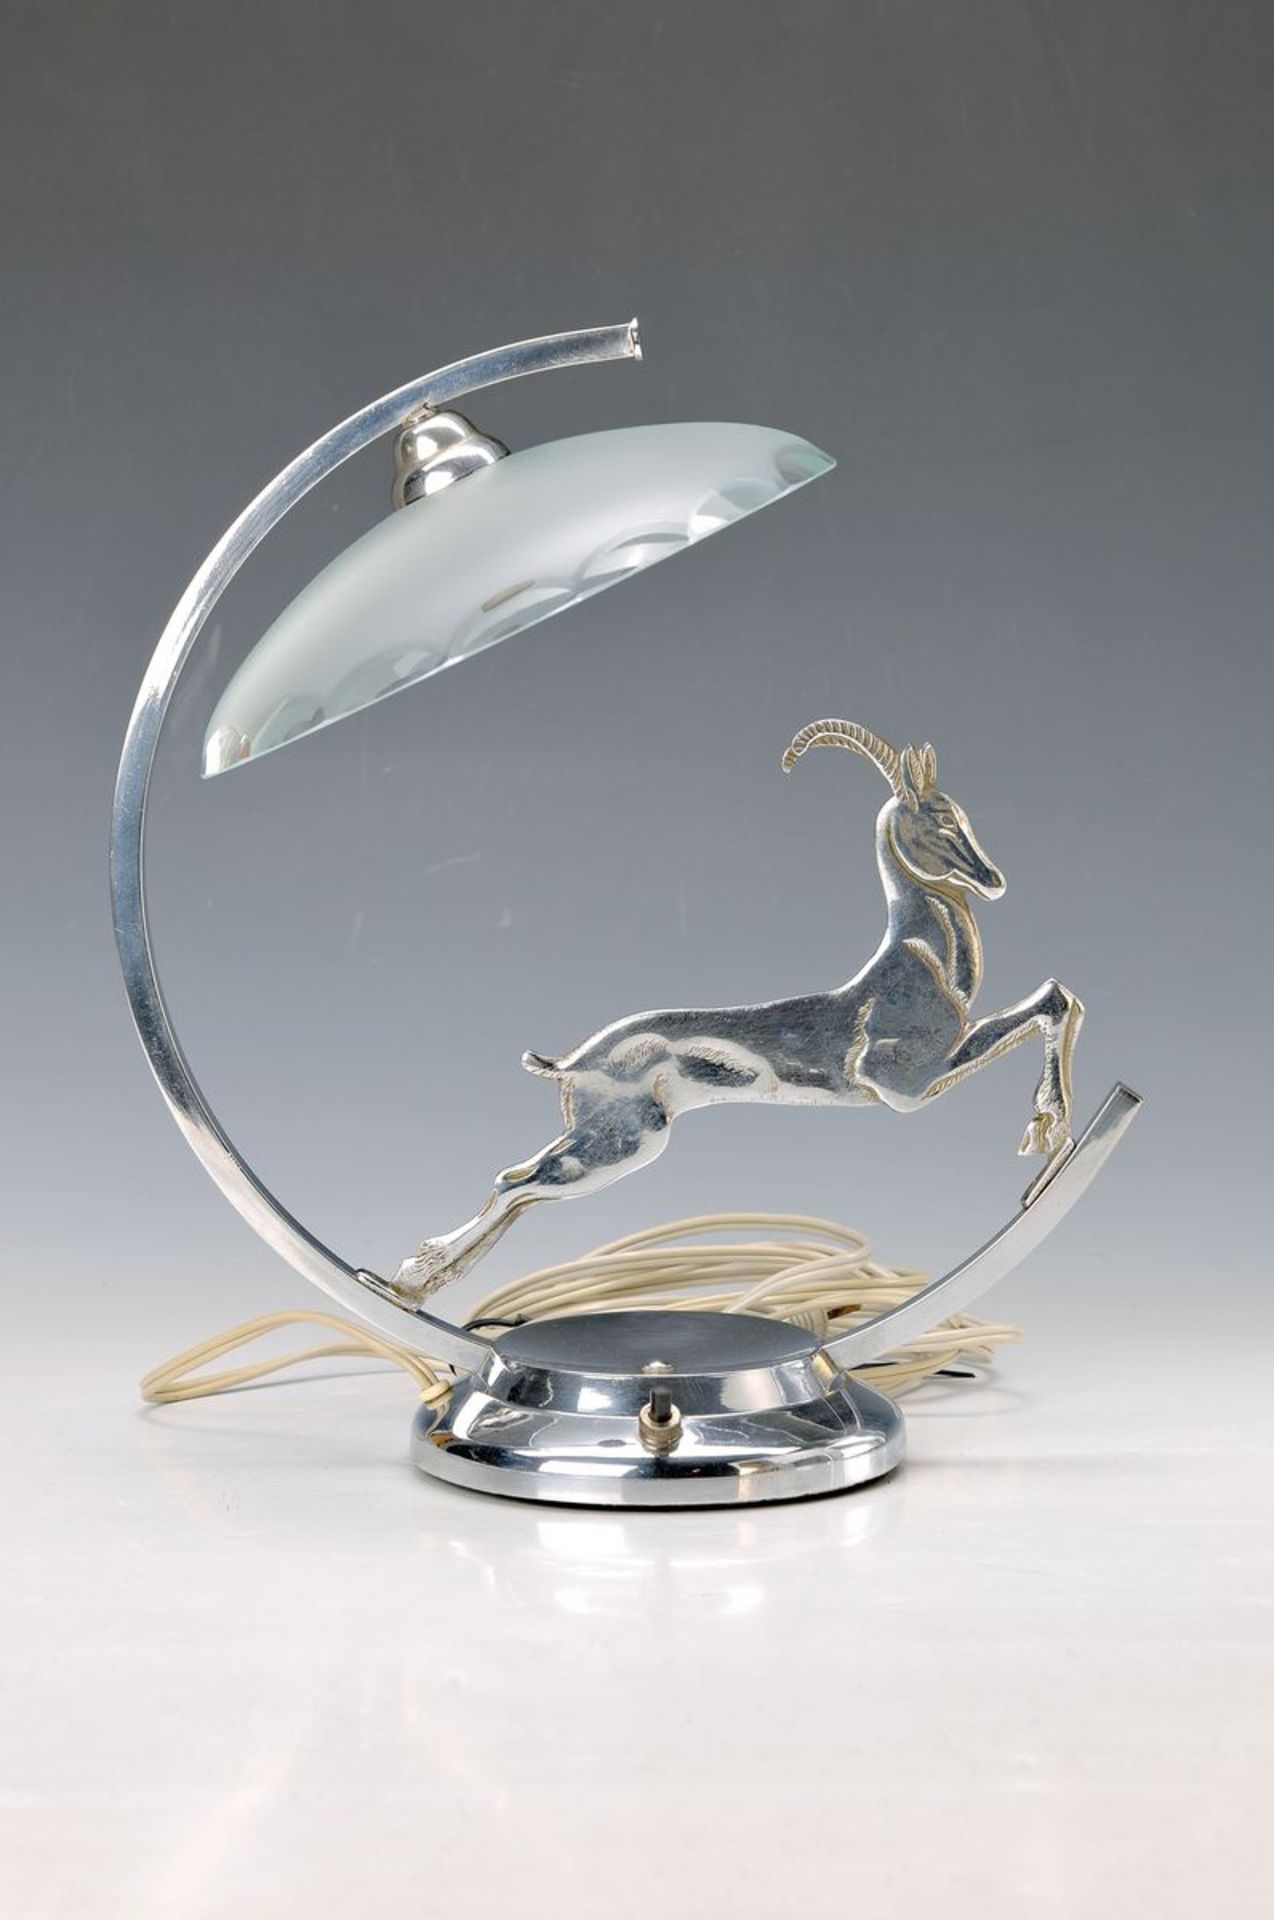 species-Deco-table lamp, France, 1930s, nickelplated metal, decor of a jumping chamois, glass lamp